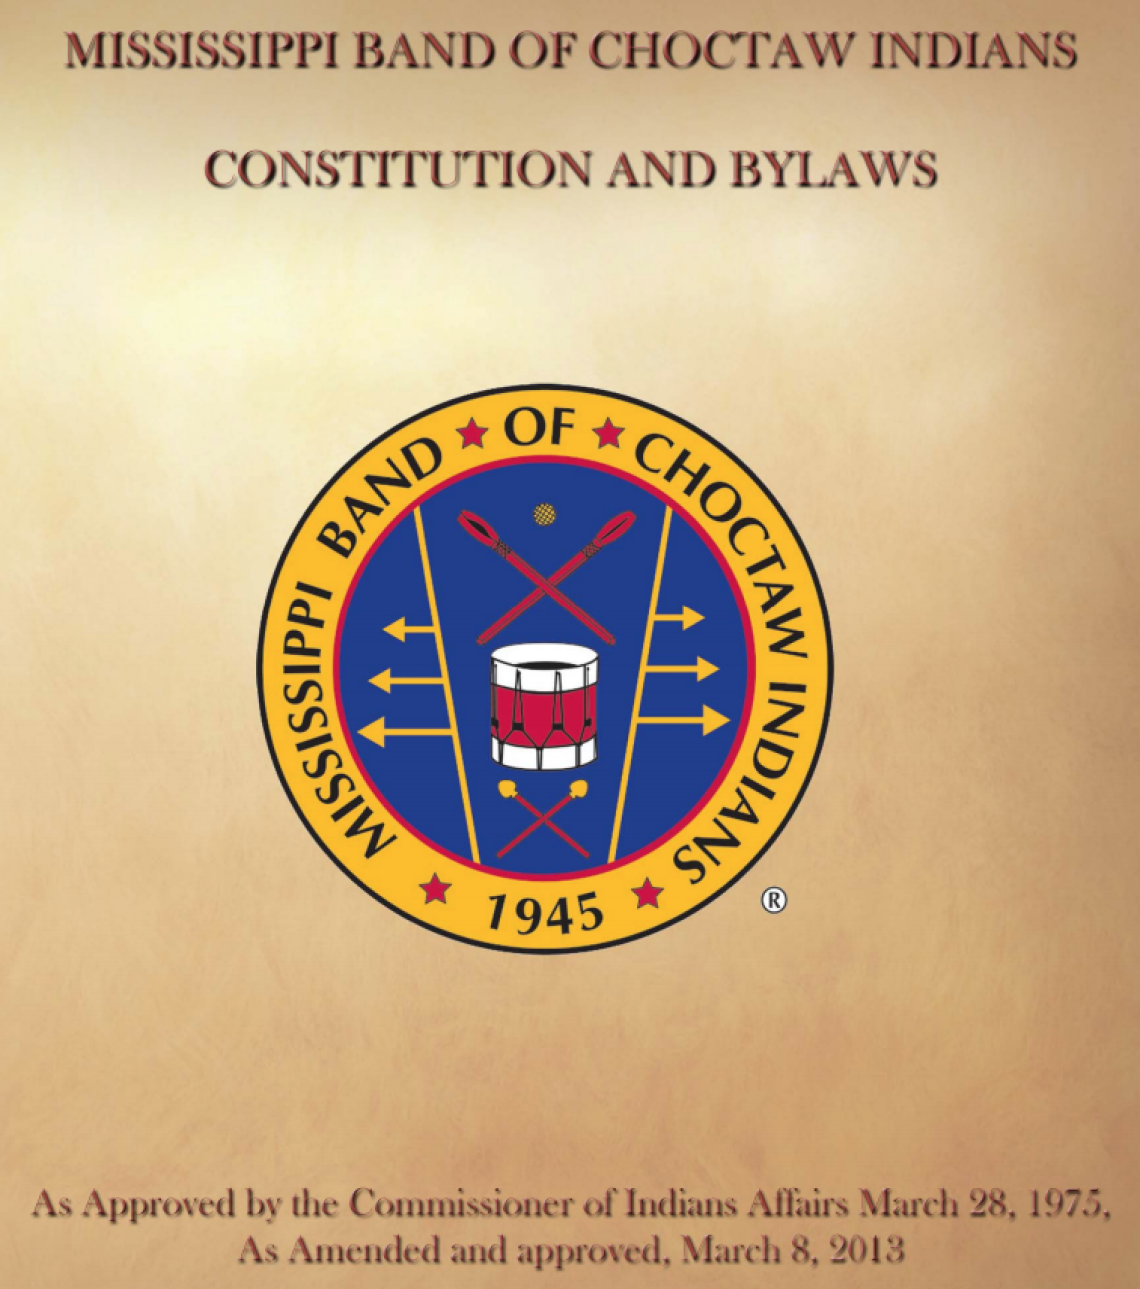 Mississippi Band of Choctaw Indians: Amendments Excerpt